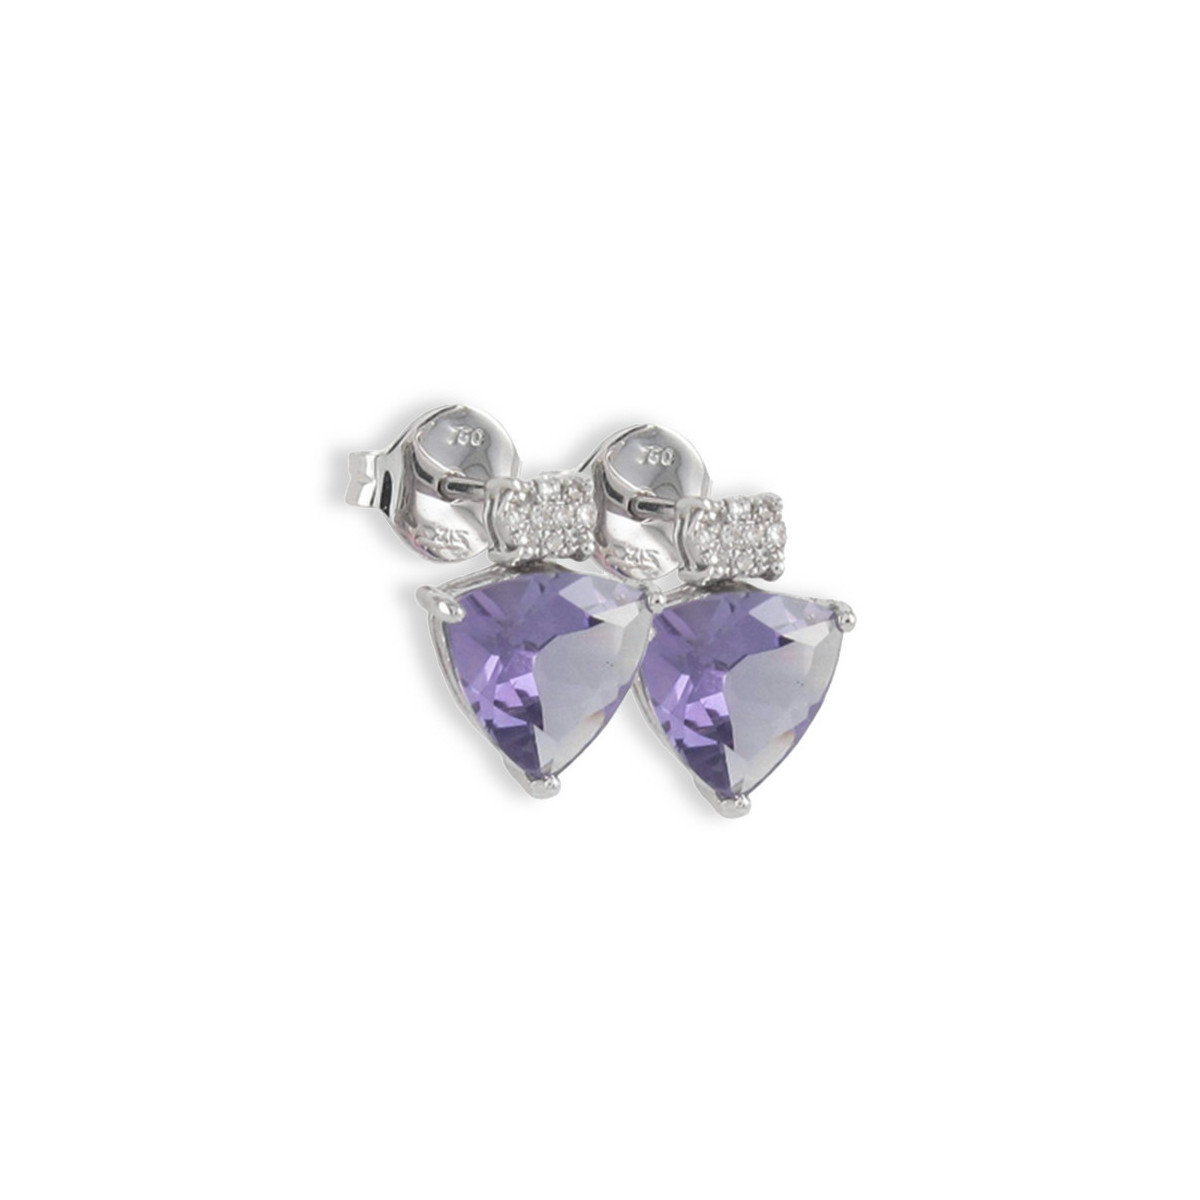 GOLD DIAMONDS AND AMETHYST EARRING